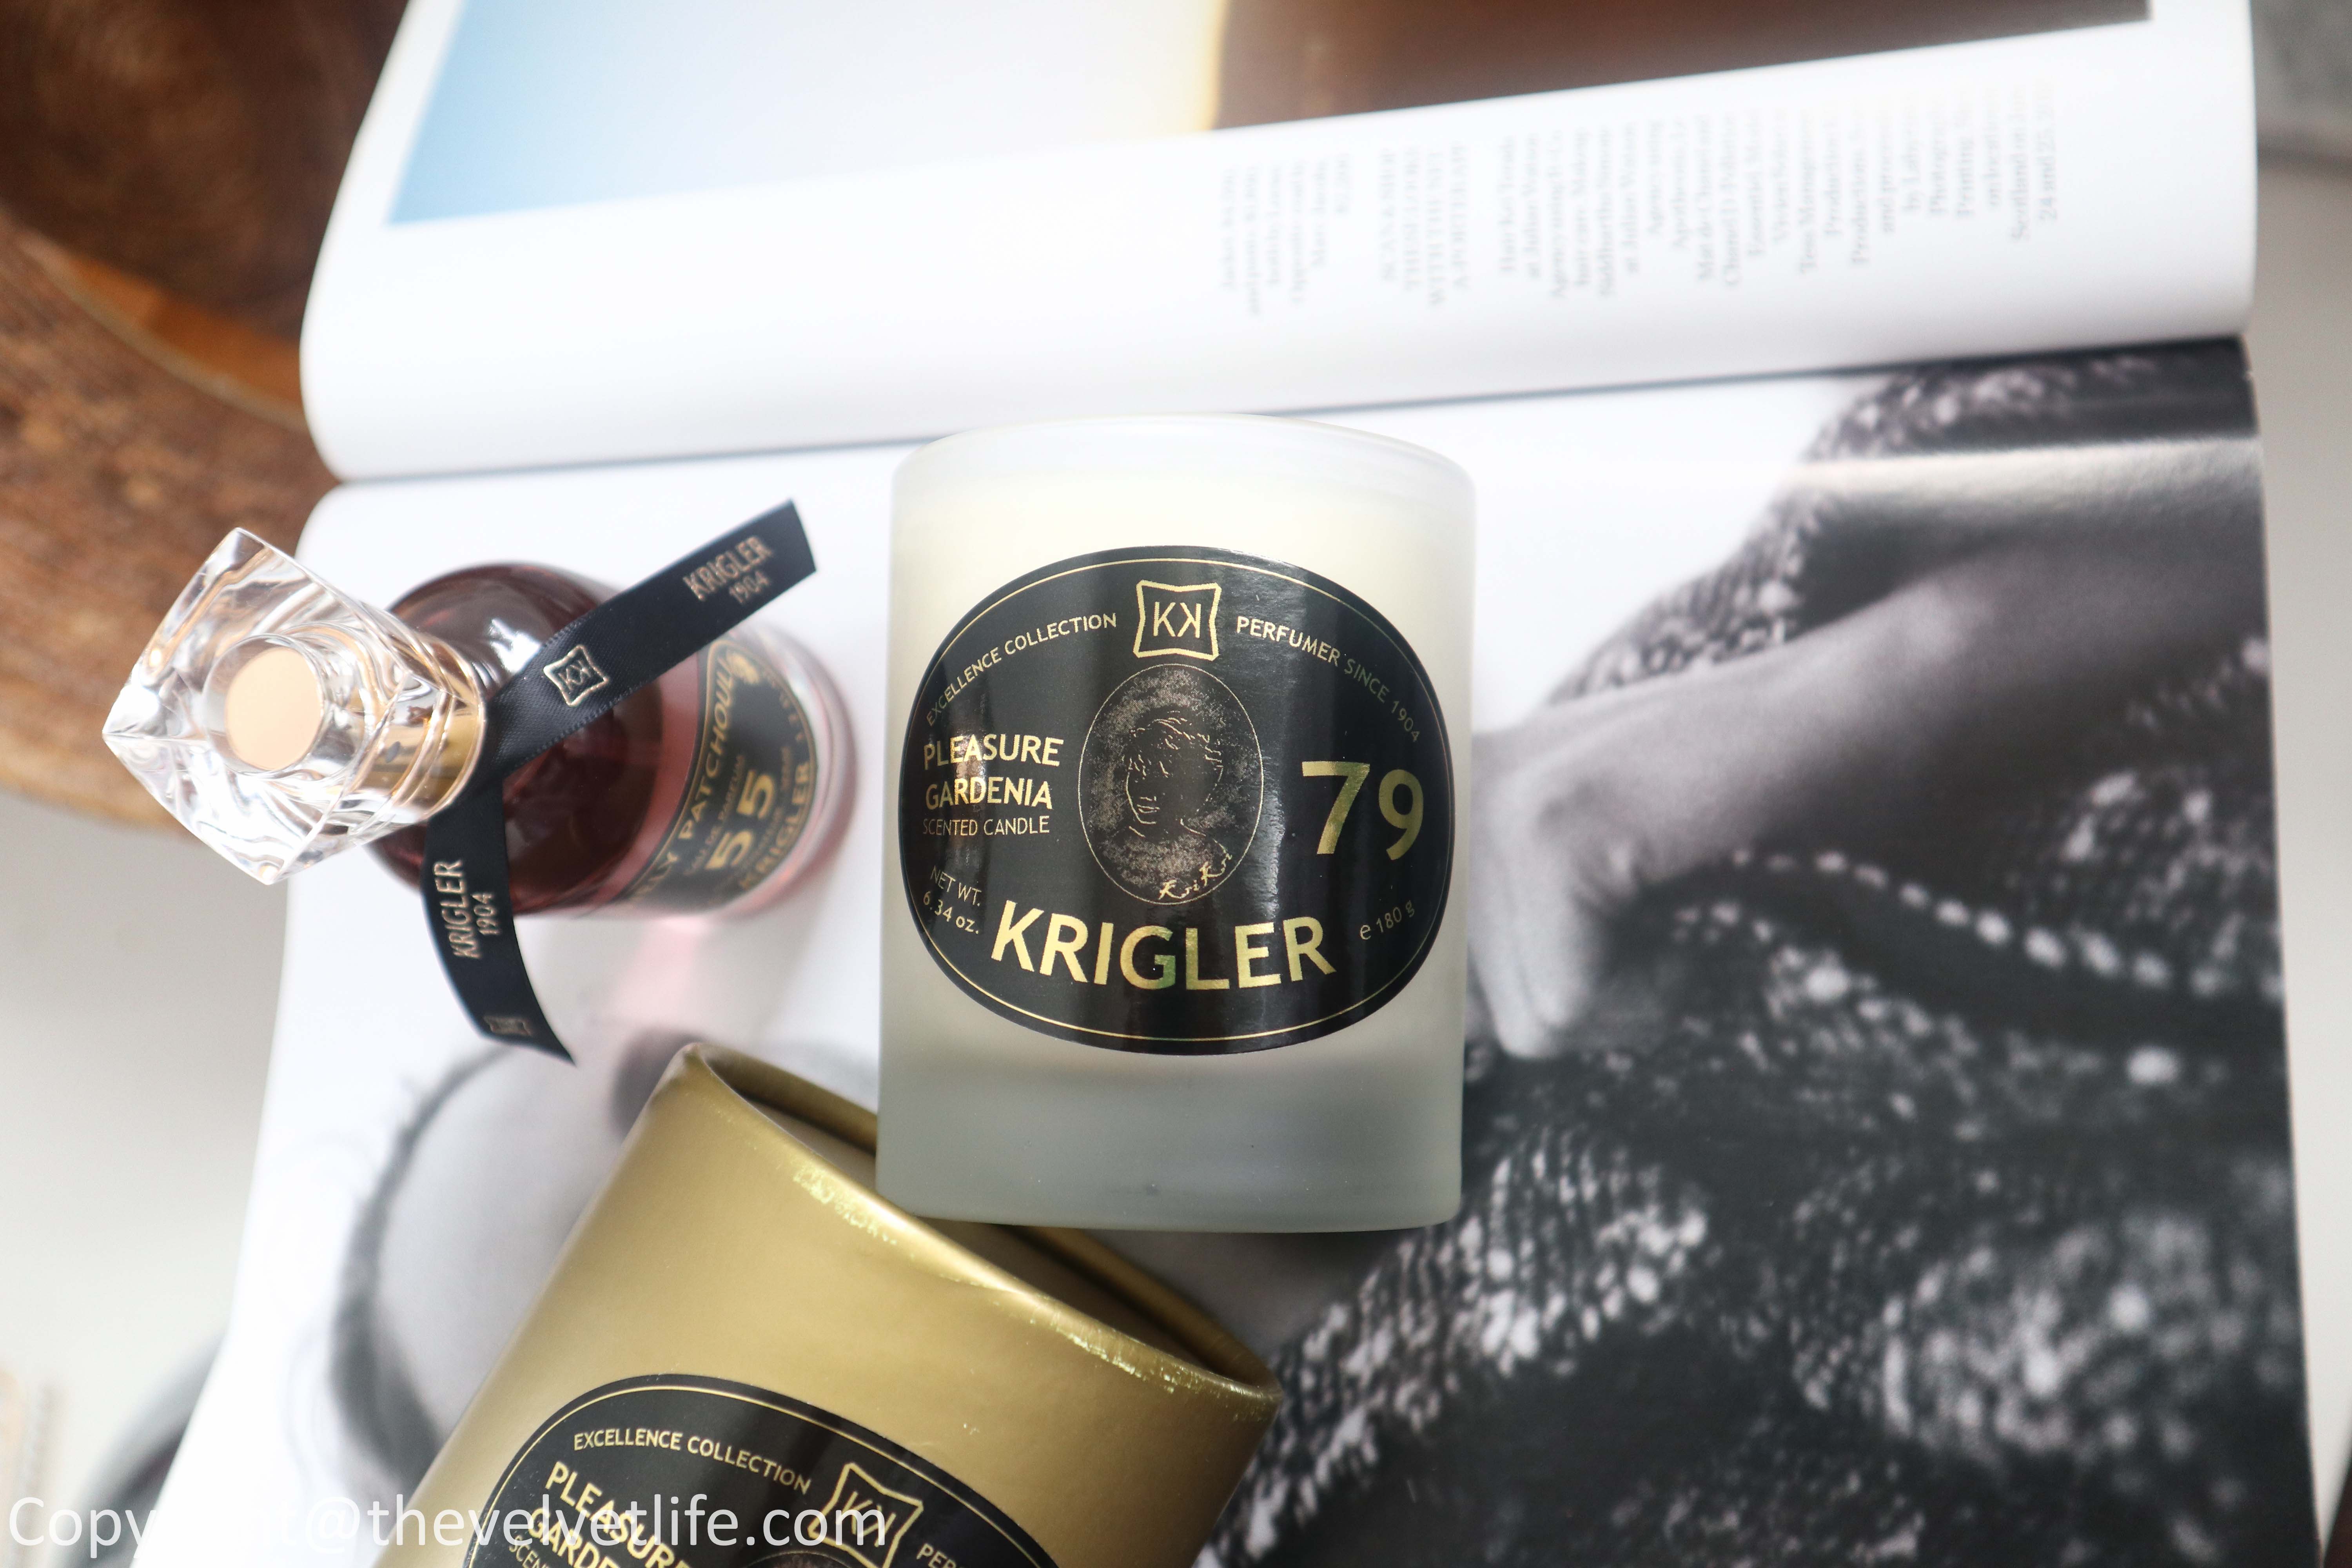 Review of Krigler Lovely Patchouli 55 Classic Perfume and Pleasure Gardenia 79 Scented Candle